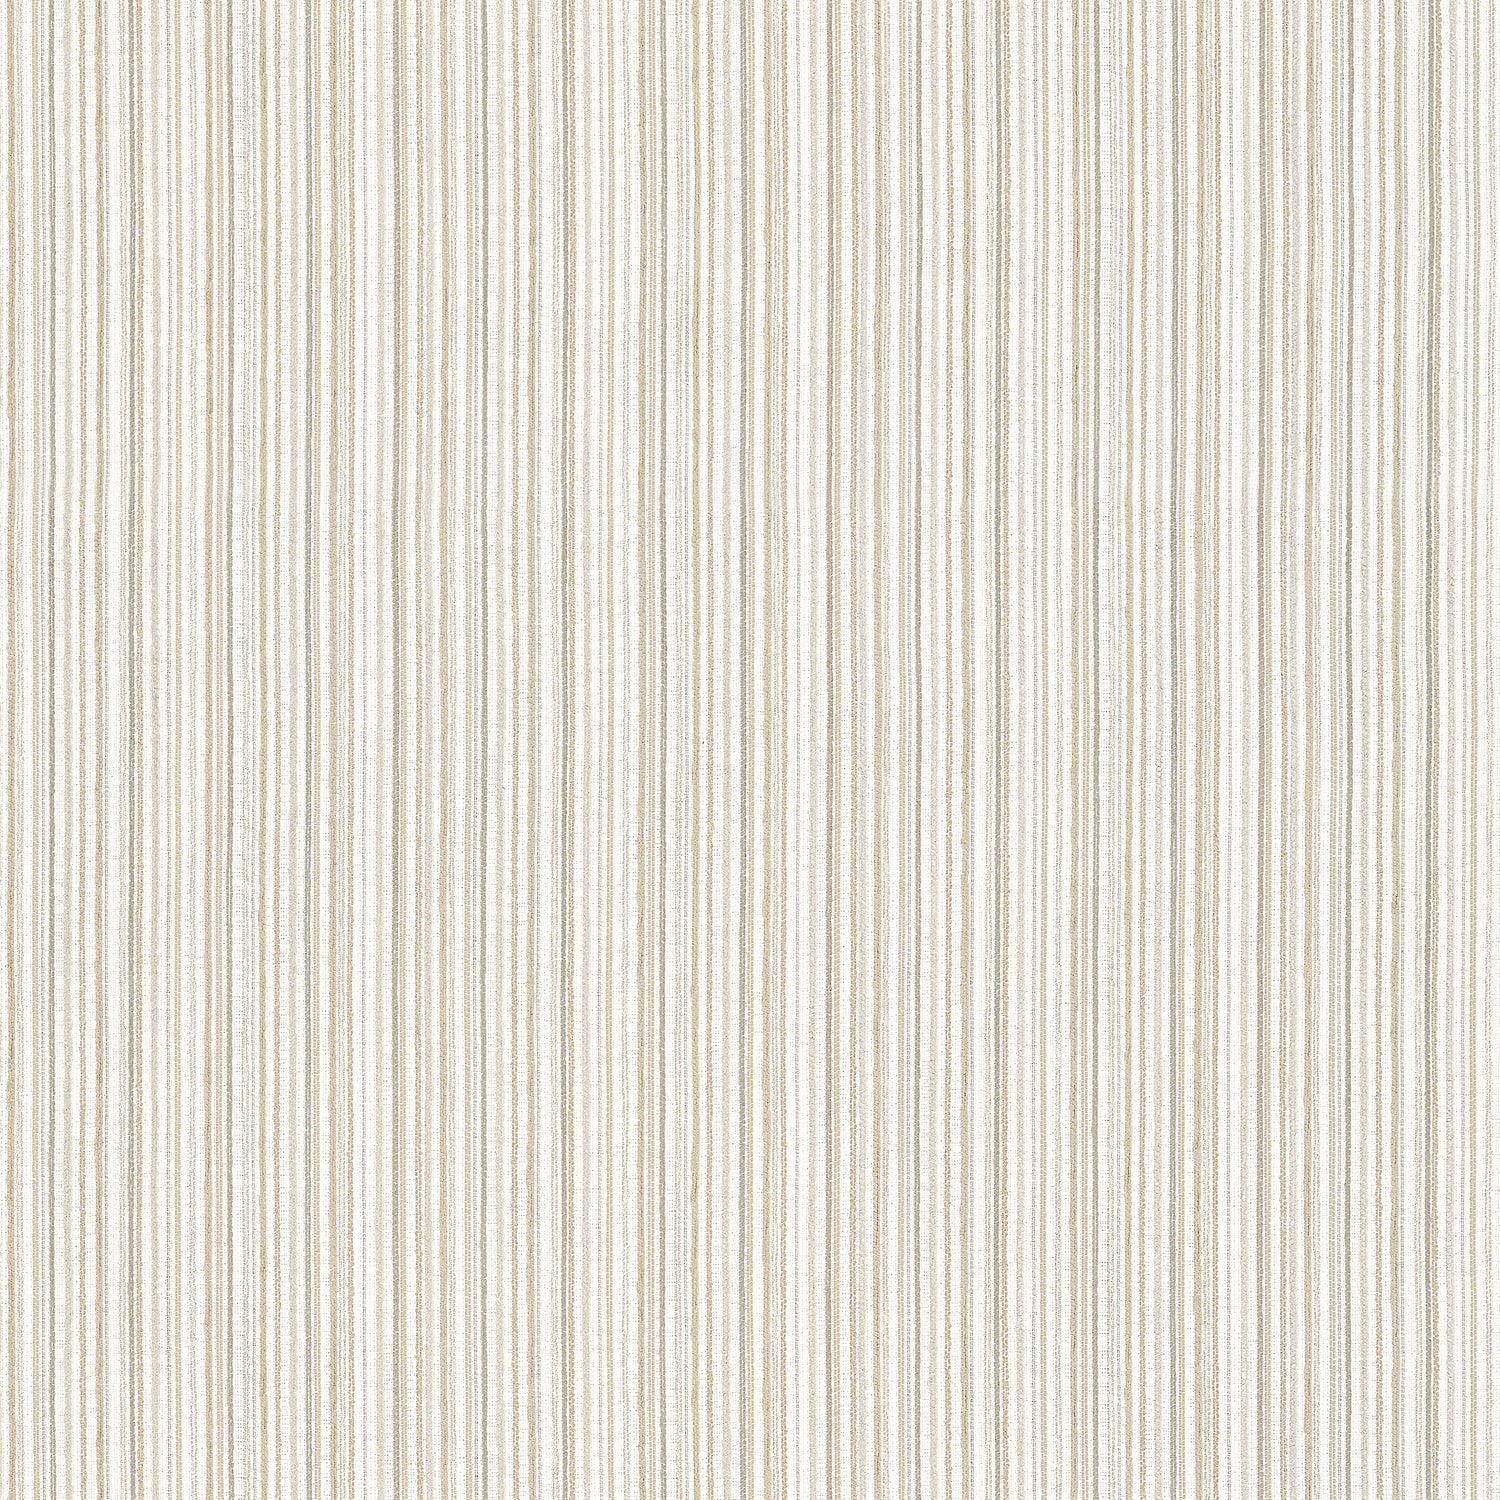 Ernie Stripe fabric in oatmeal color - pattern number W81940 - by Thibaut in the Companions collection